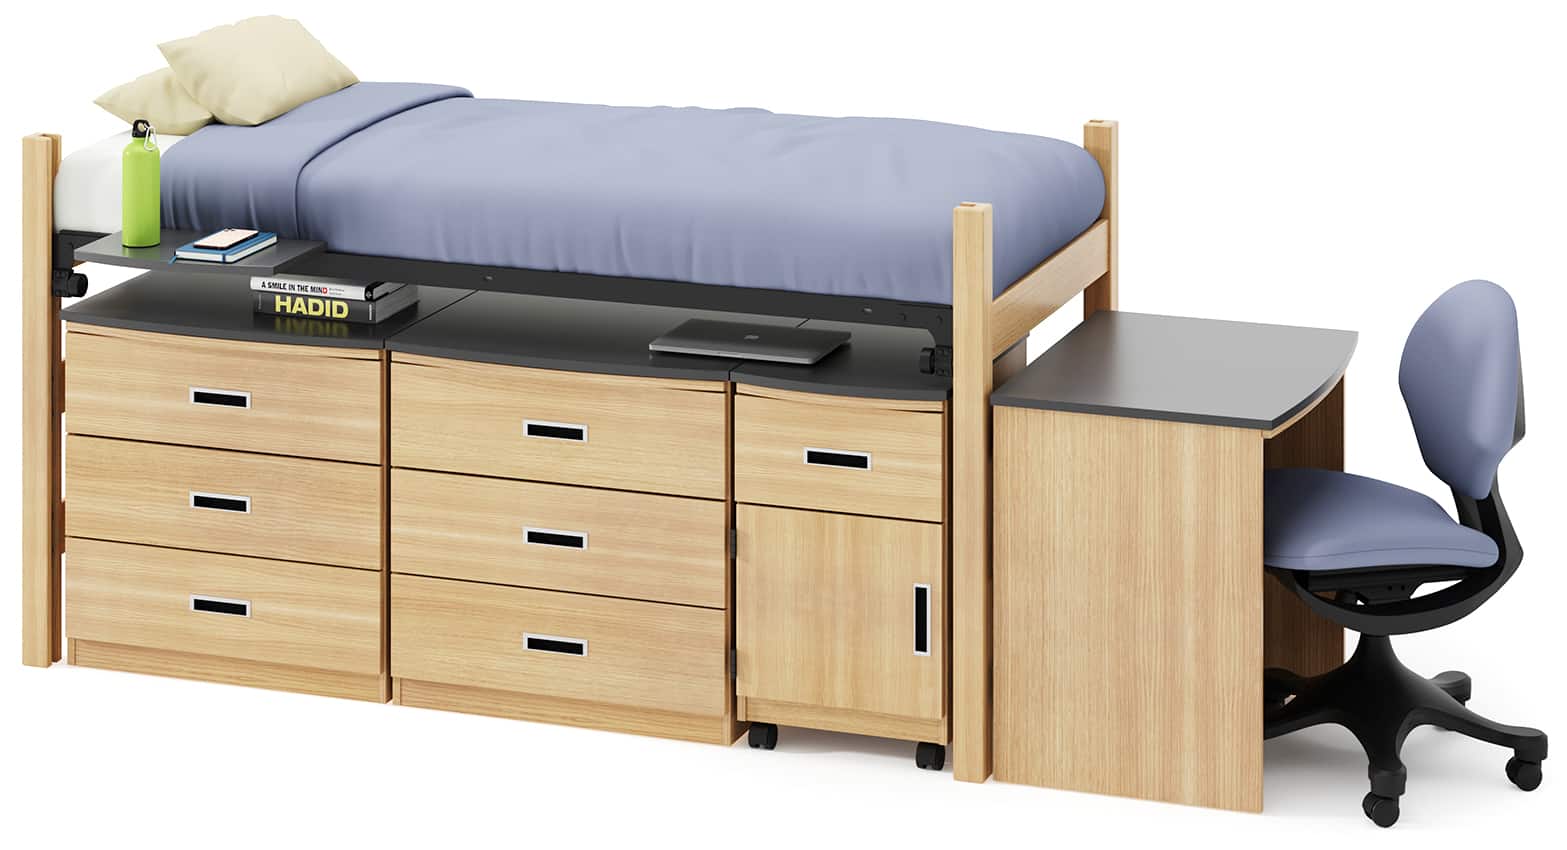 zTrak Bed System with zLok with 2 Merit 3-Drawer Chests and Rolling Pedestal Underneath and Merit Writing Desk and Trey Chair